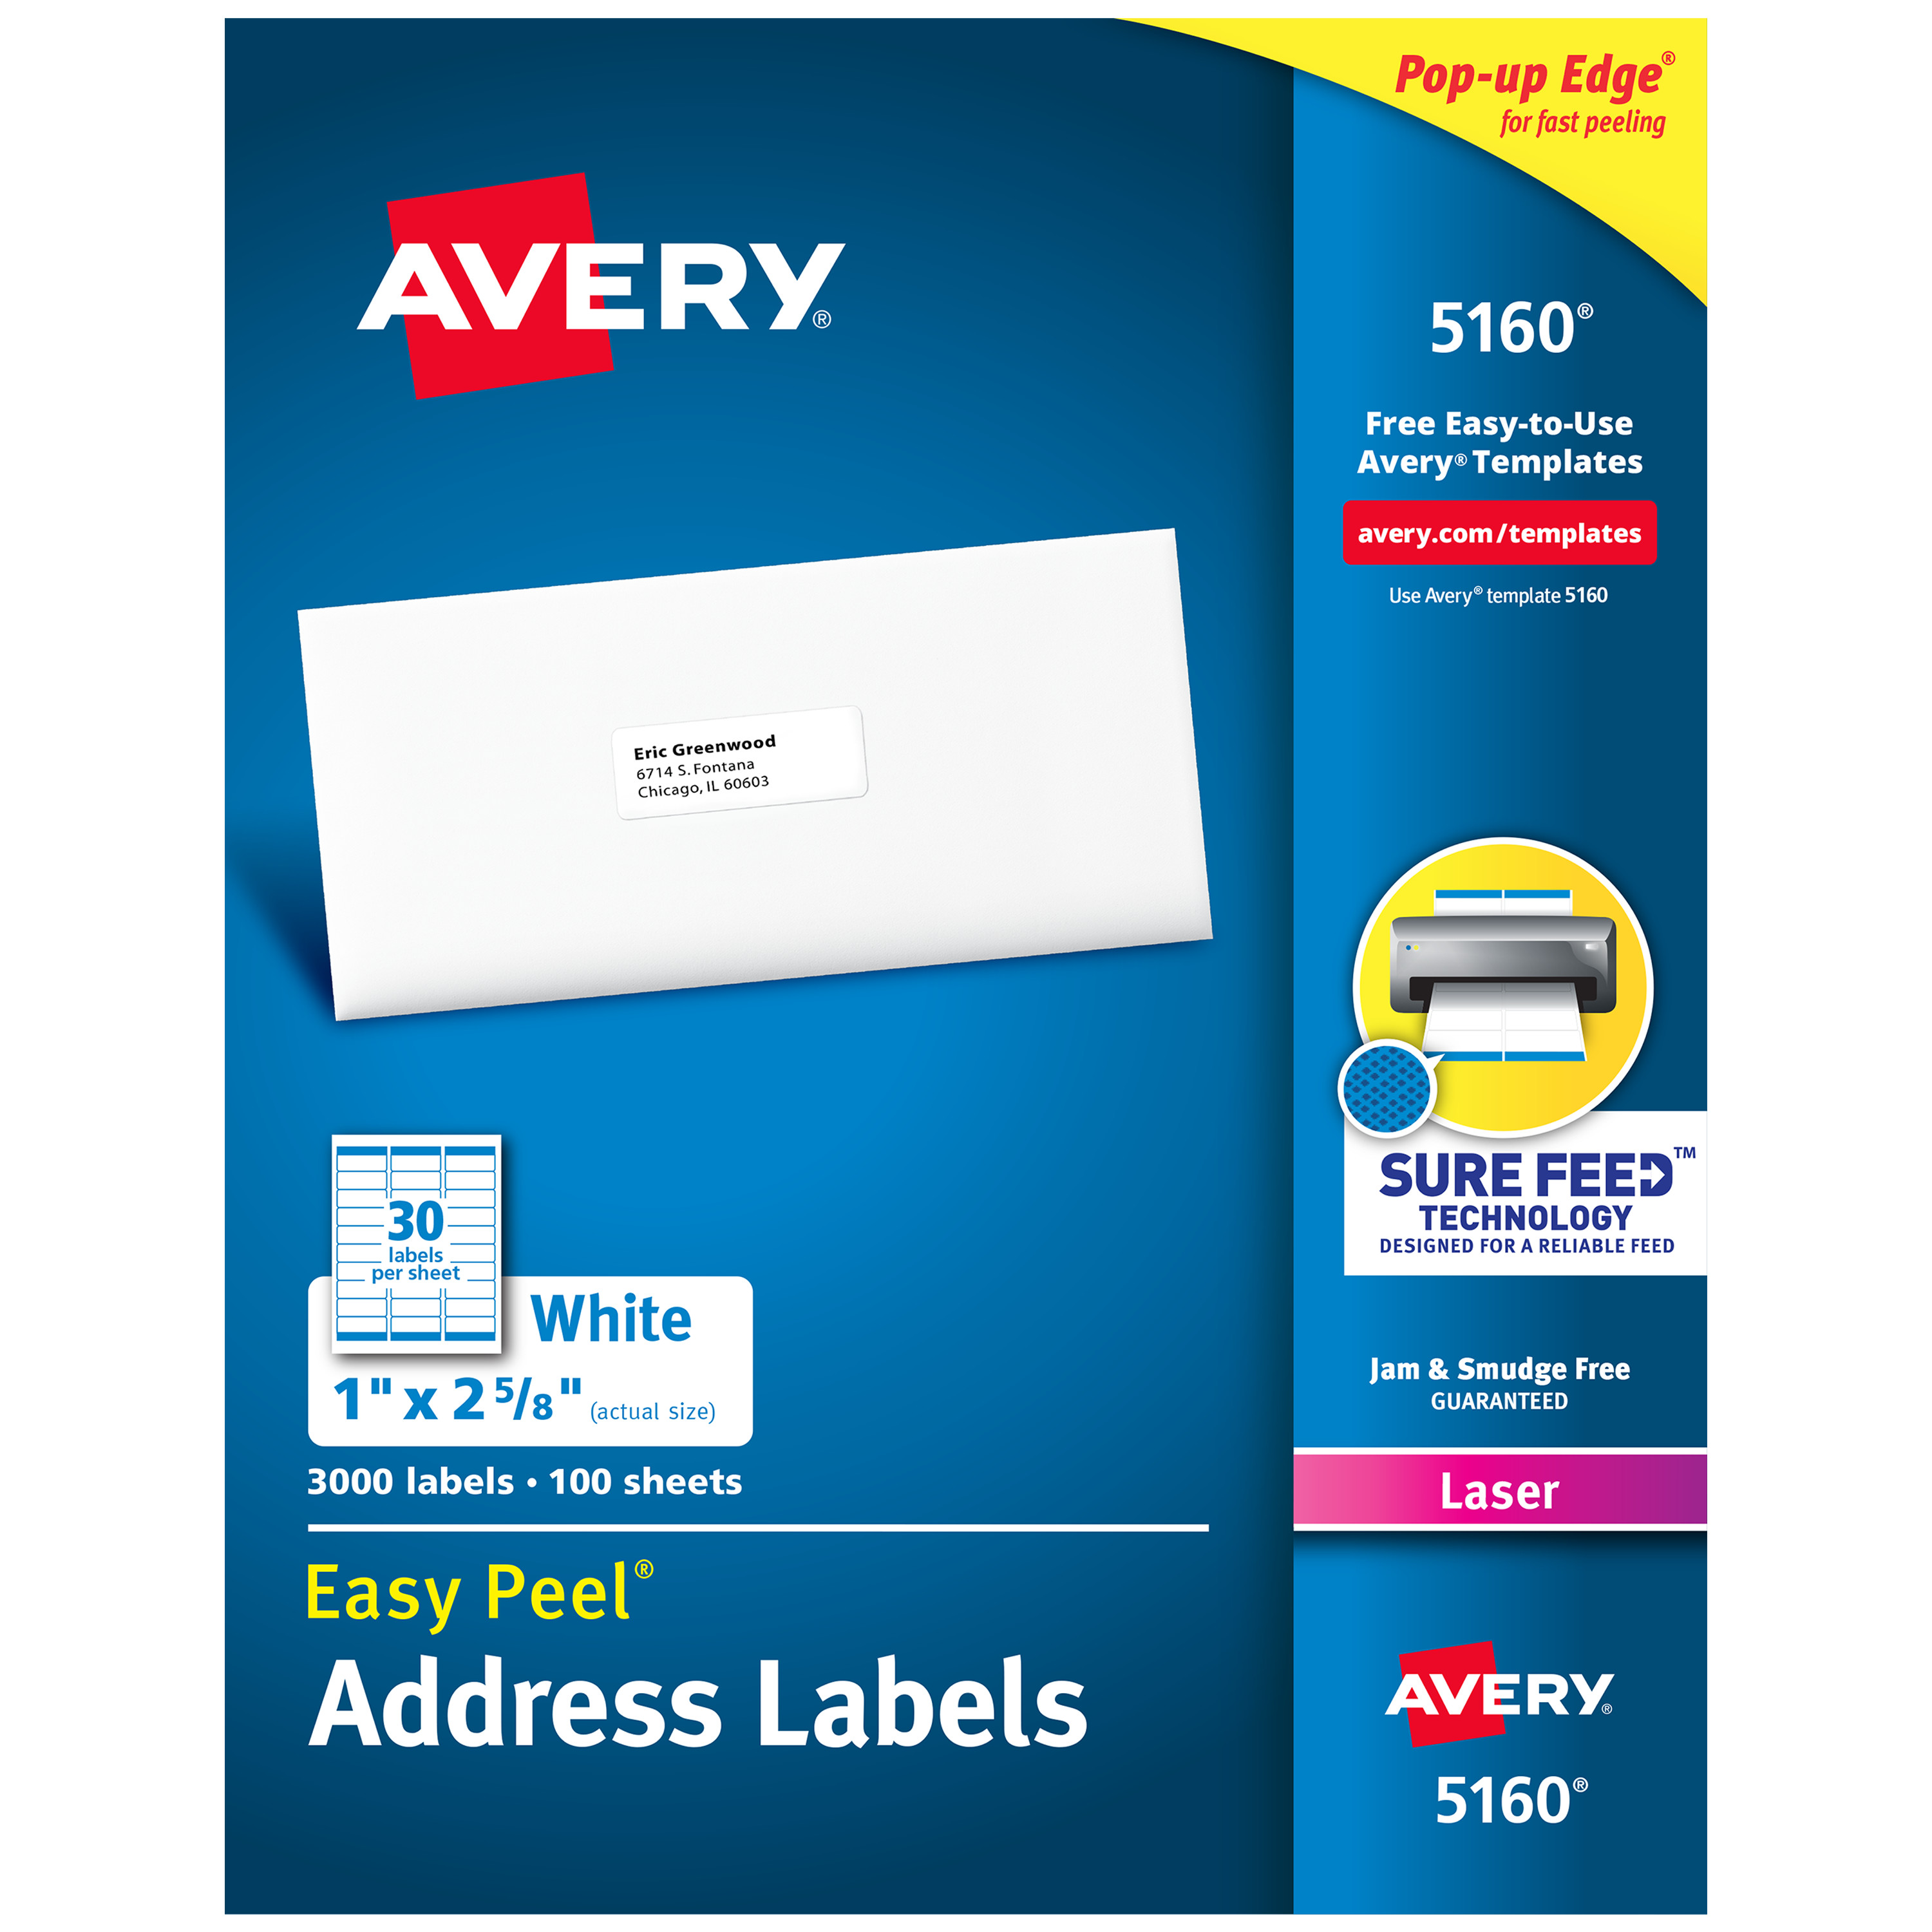 Download Avery Template 8160 Mac